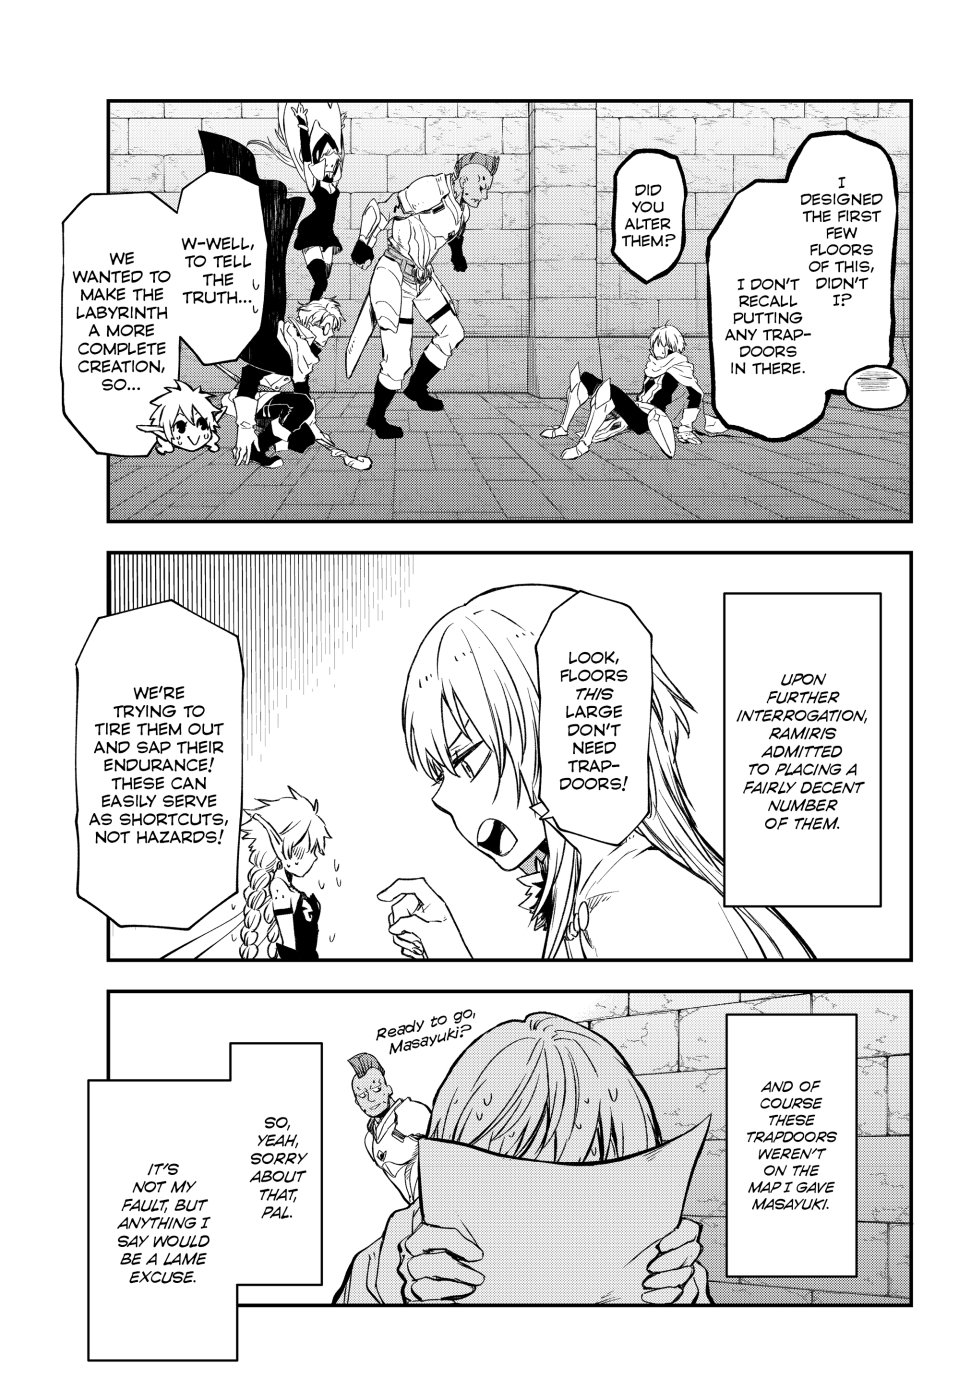 hat Time I Got Reincarnated as a Slime, Chapter 116